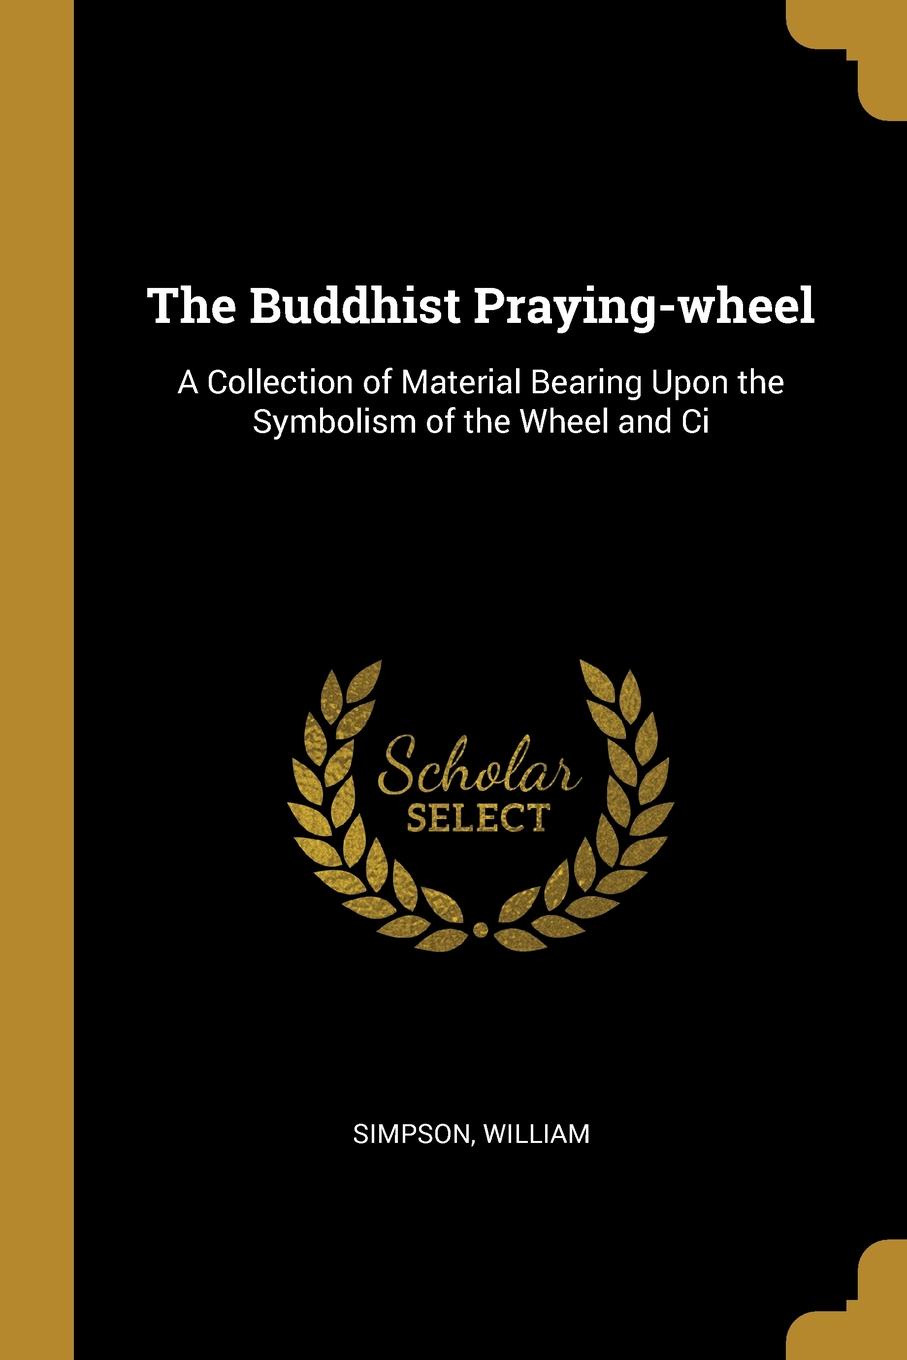 The Buddhist Praying-wheel. A Collection of Material Bearing Upon the Symbolism of the Wheel and Ci